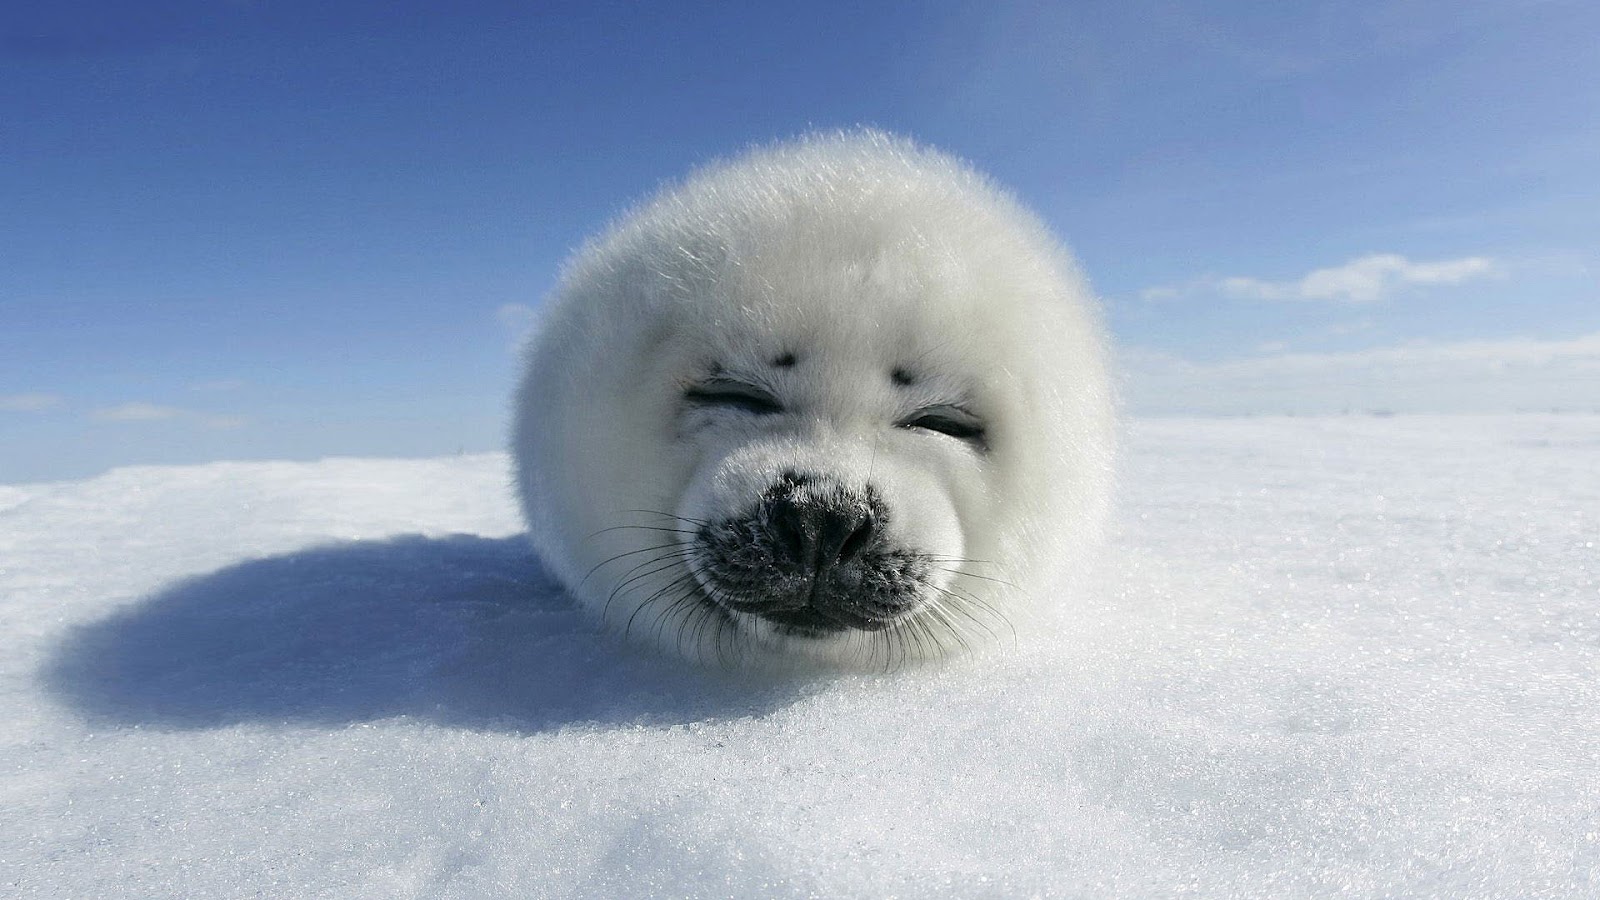  wallpaper with a baby seal resting on the snow hd seals wallpapers 1600x900